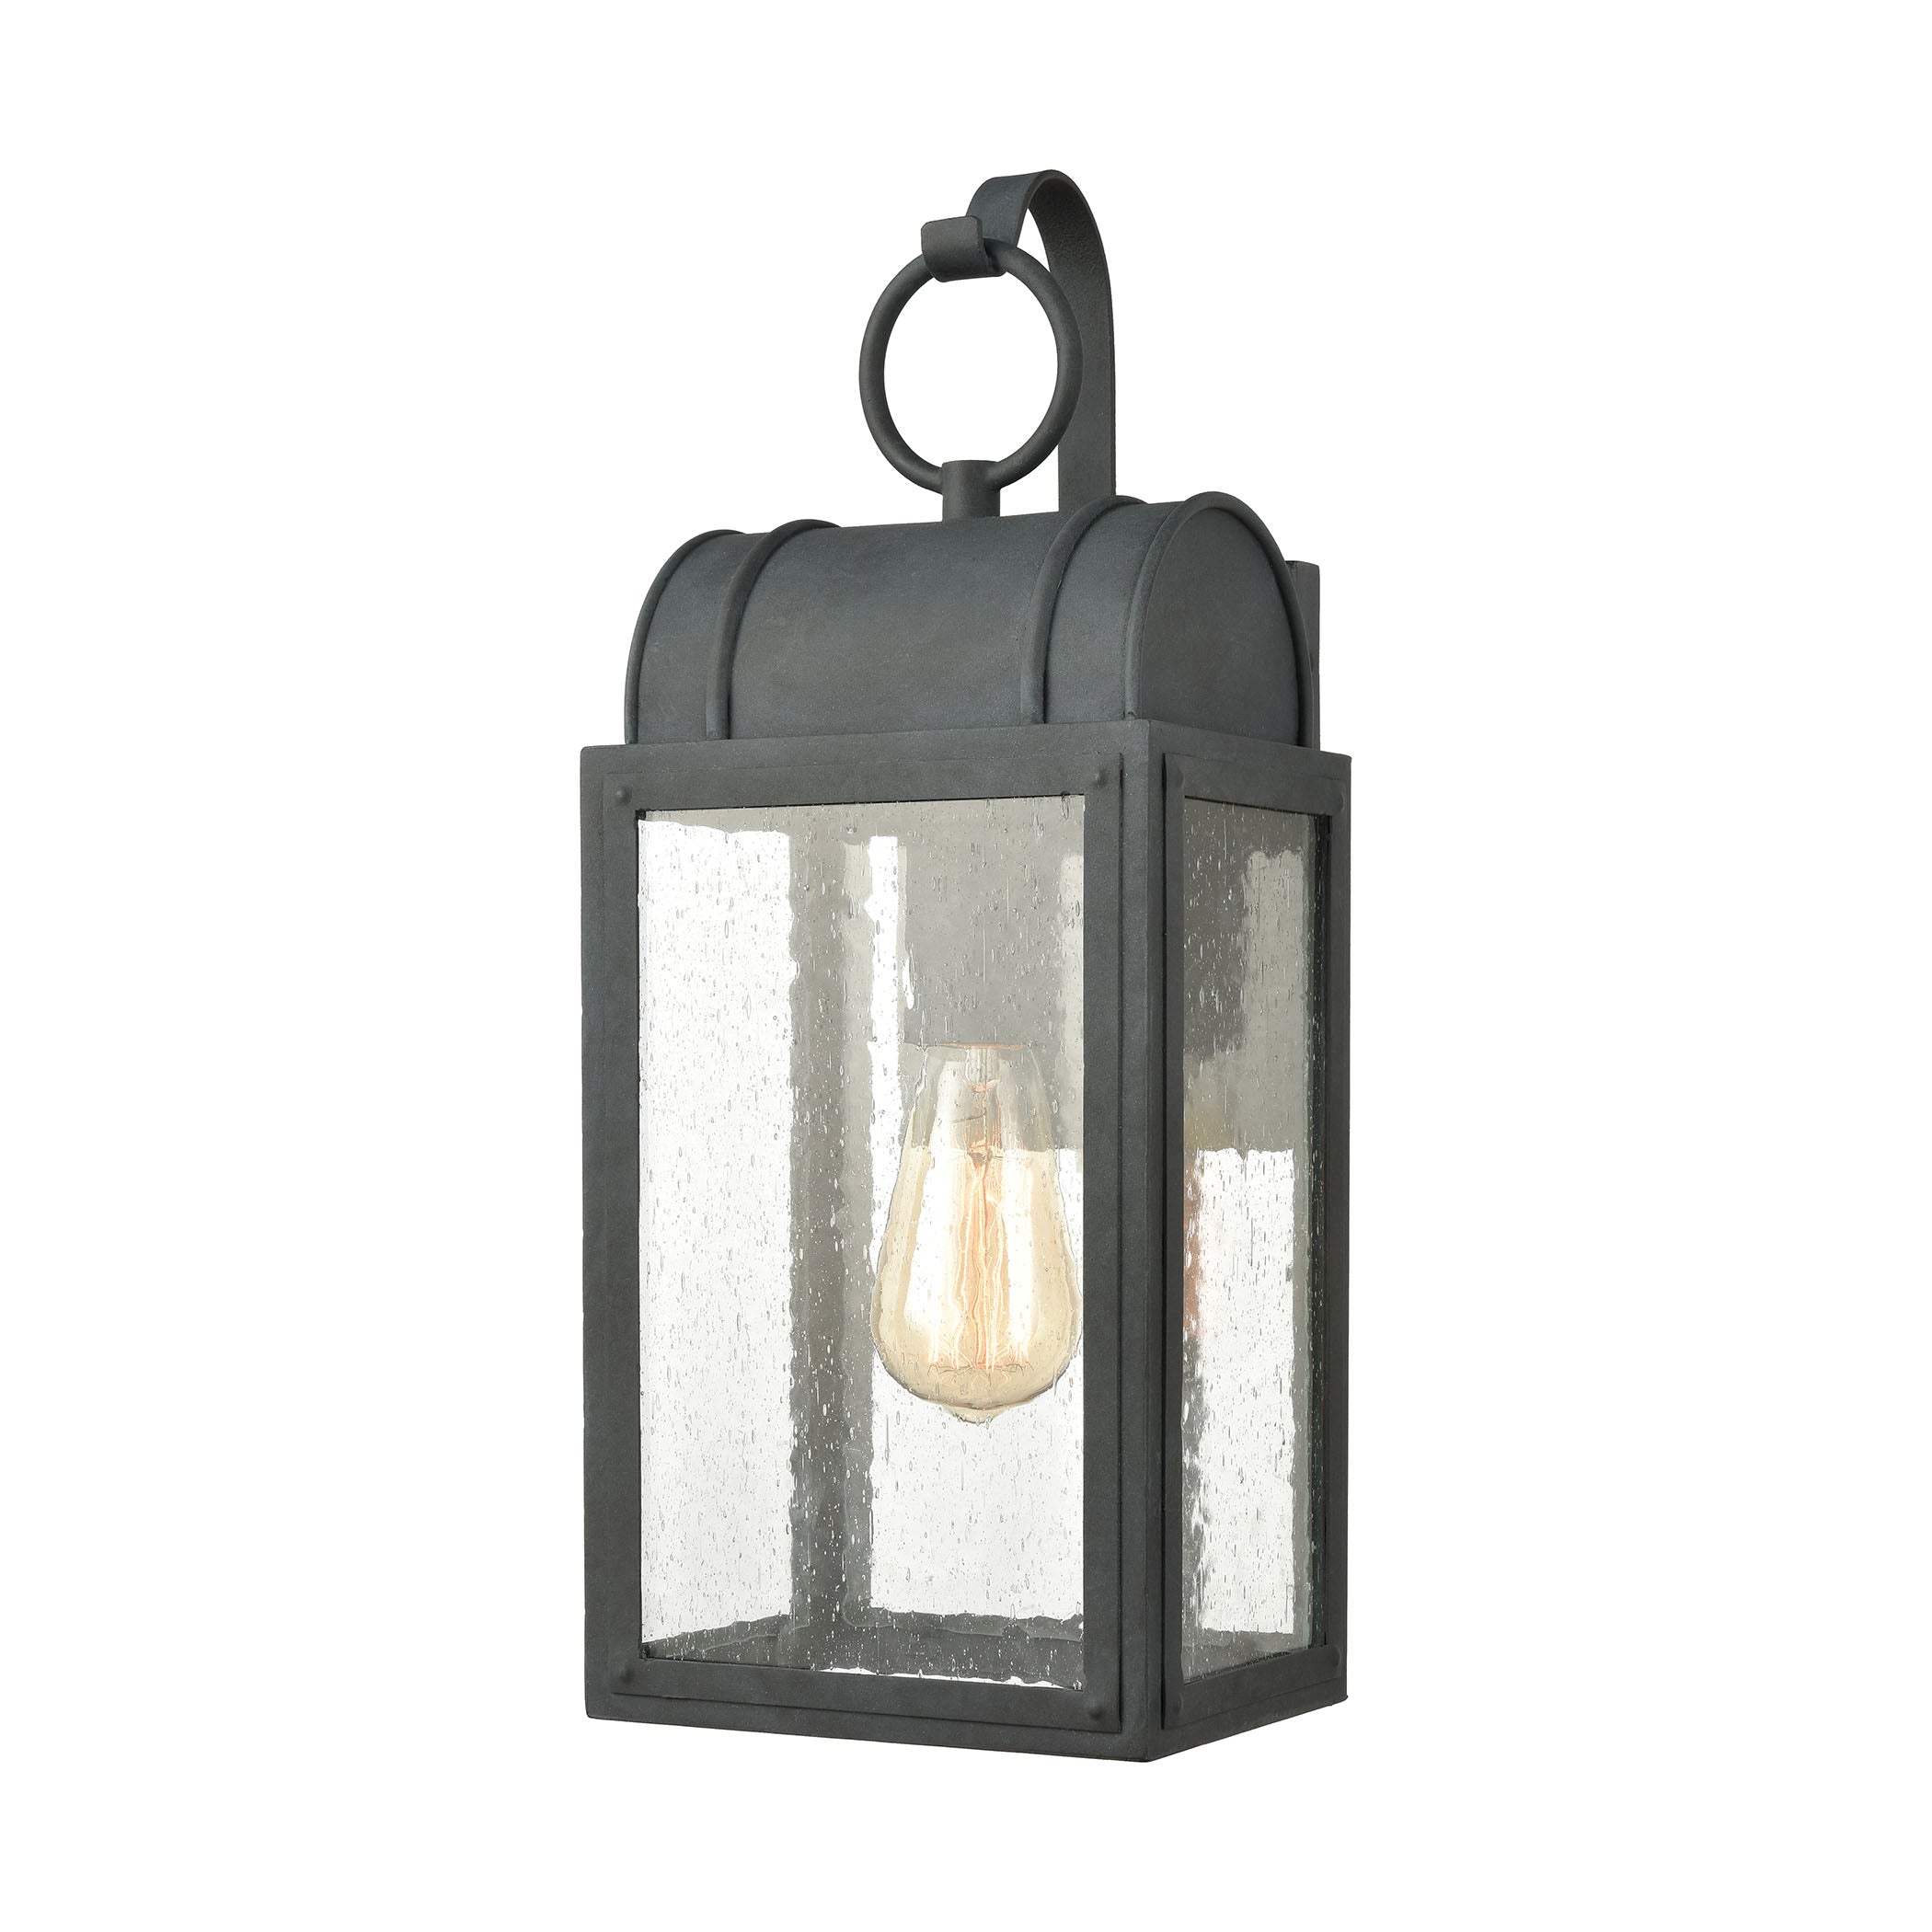 ELK Lighting 45481/1 Heritage Hills 1-Light Outdoor Sconce in Aged Zinc with Seedy Glass Enclosure